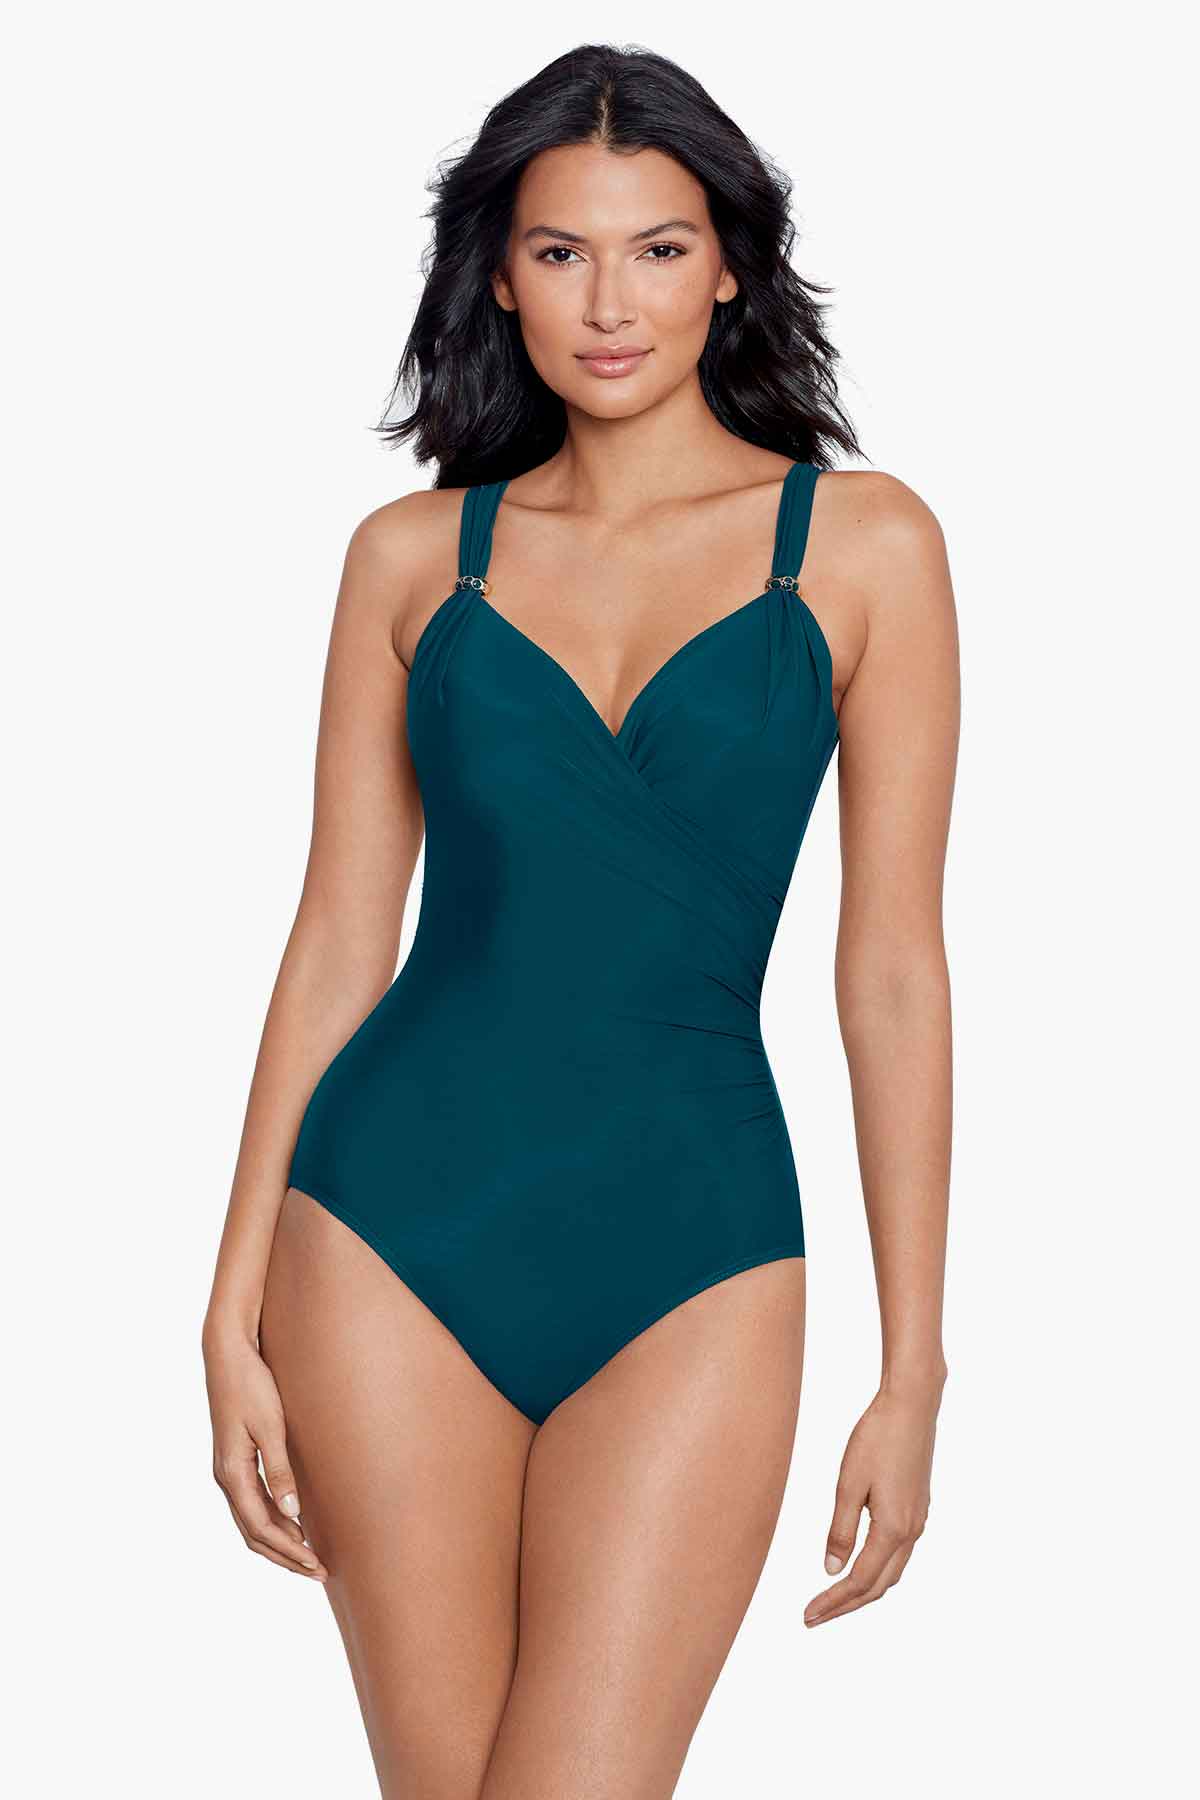 InstantFigure Compression Skirted One-Piece Swimsuit 